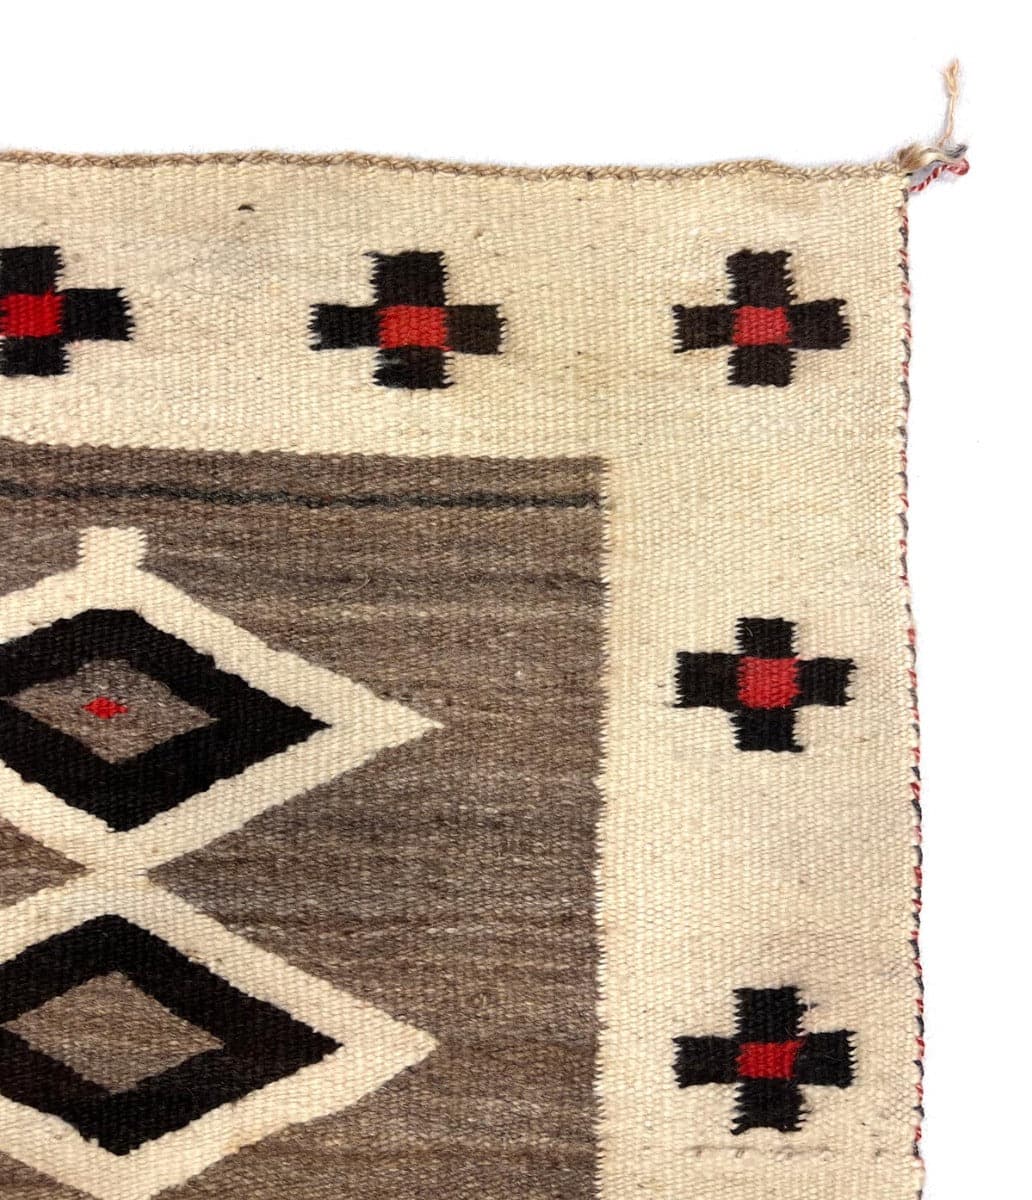 Navajo Crystal Rug with Cross Designs c. 1880-1893, 75.5" x 53.5" (T91654A-0422-005) 4